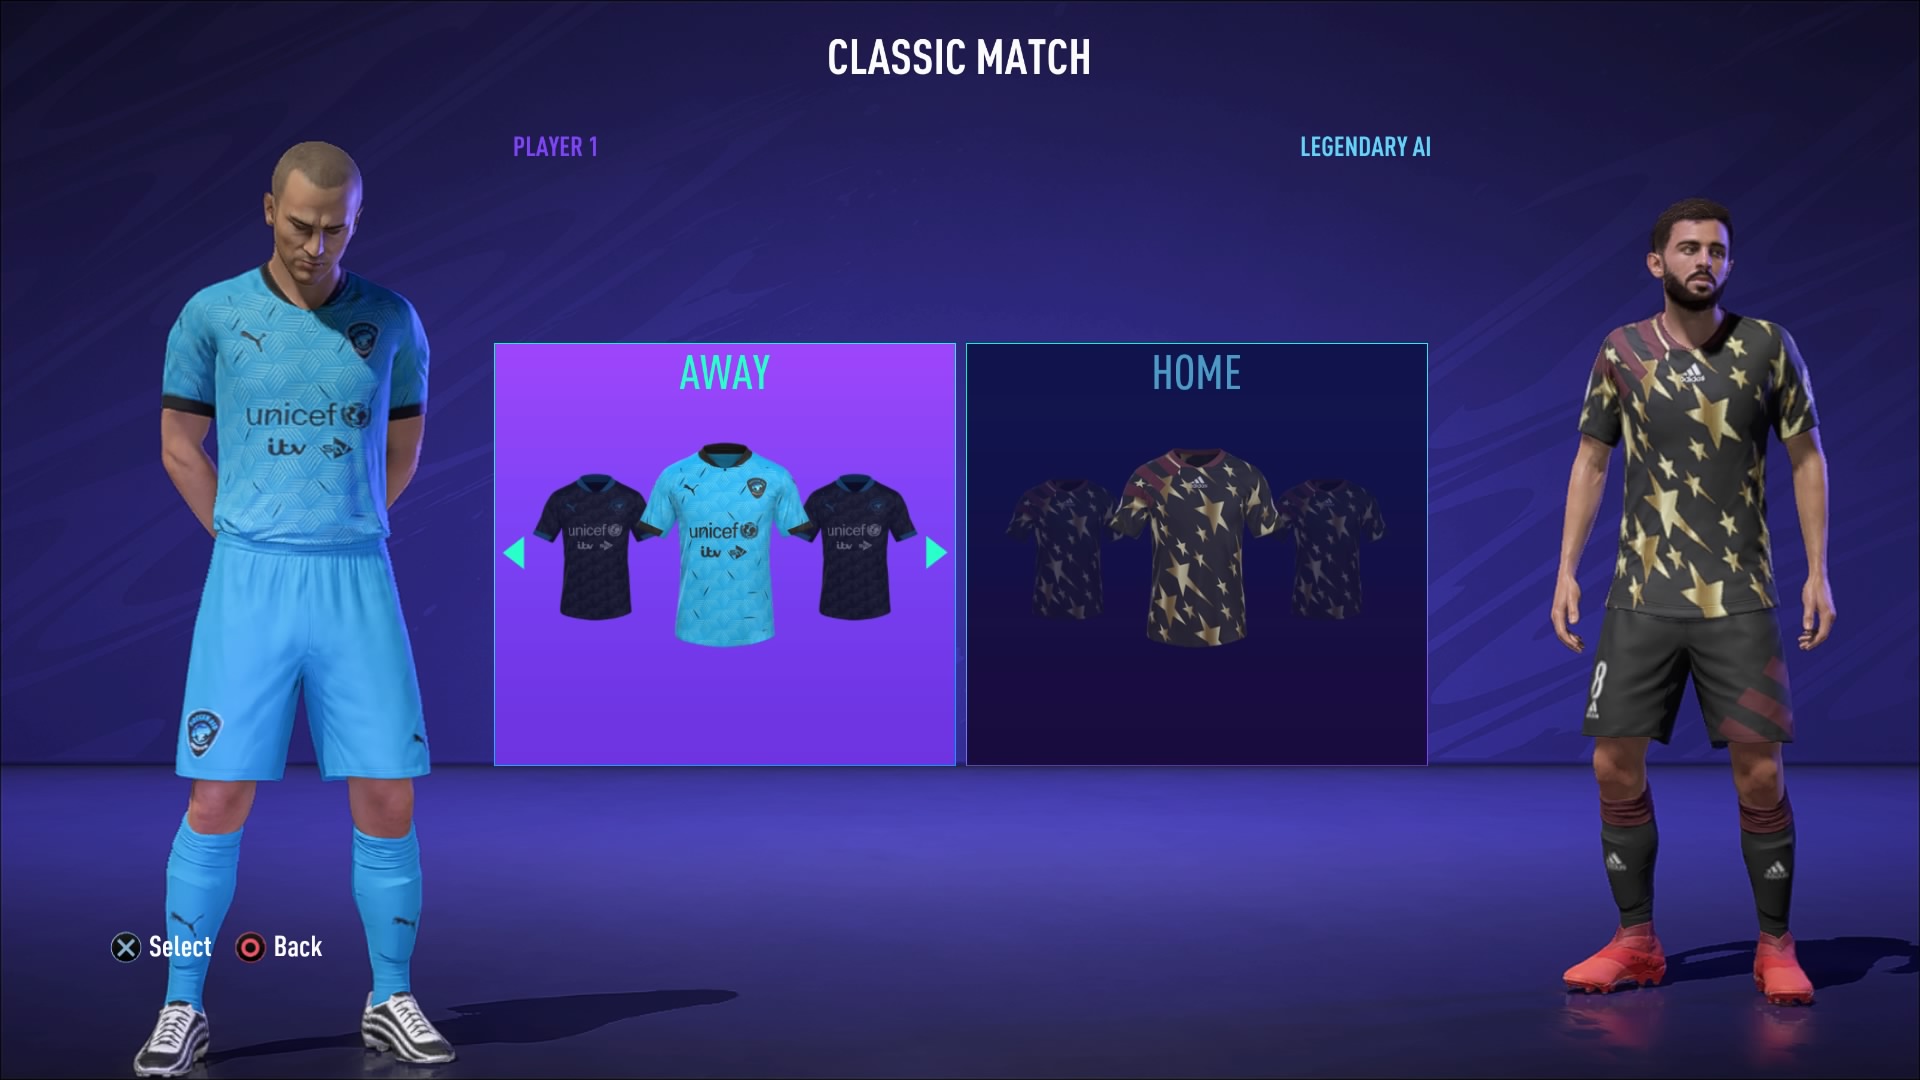 Career Mode Insider V Twitter The Team Soccer Aid Consisting Of Legends Of The Beautiful Game Which Was Added In Fifa20 Is Also Available In Fifa21 But The Option To Use These